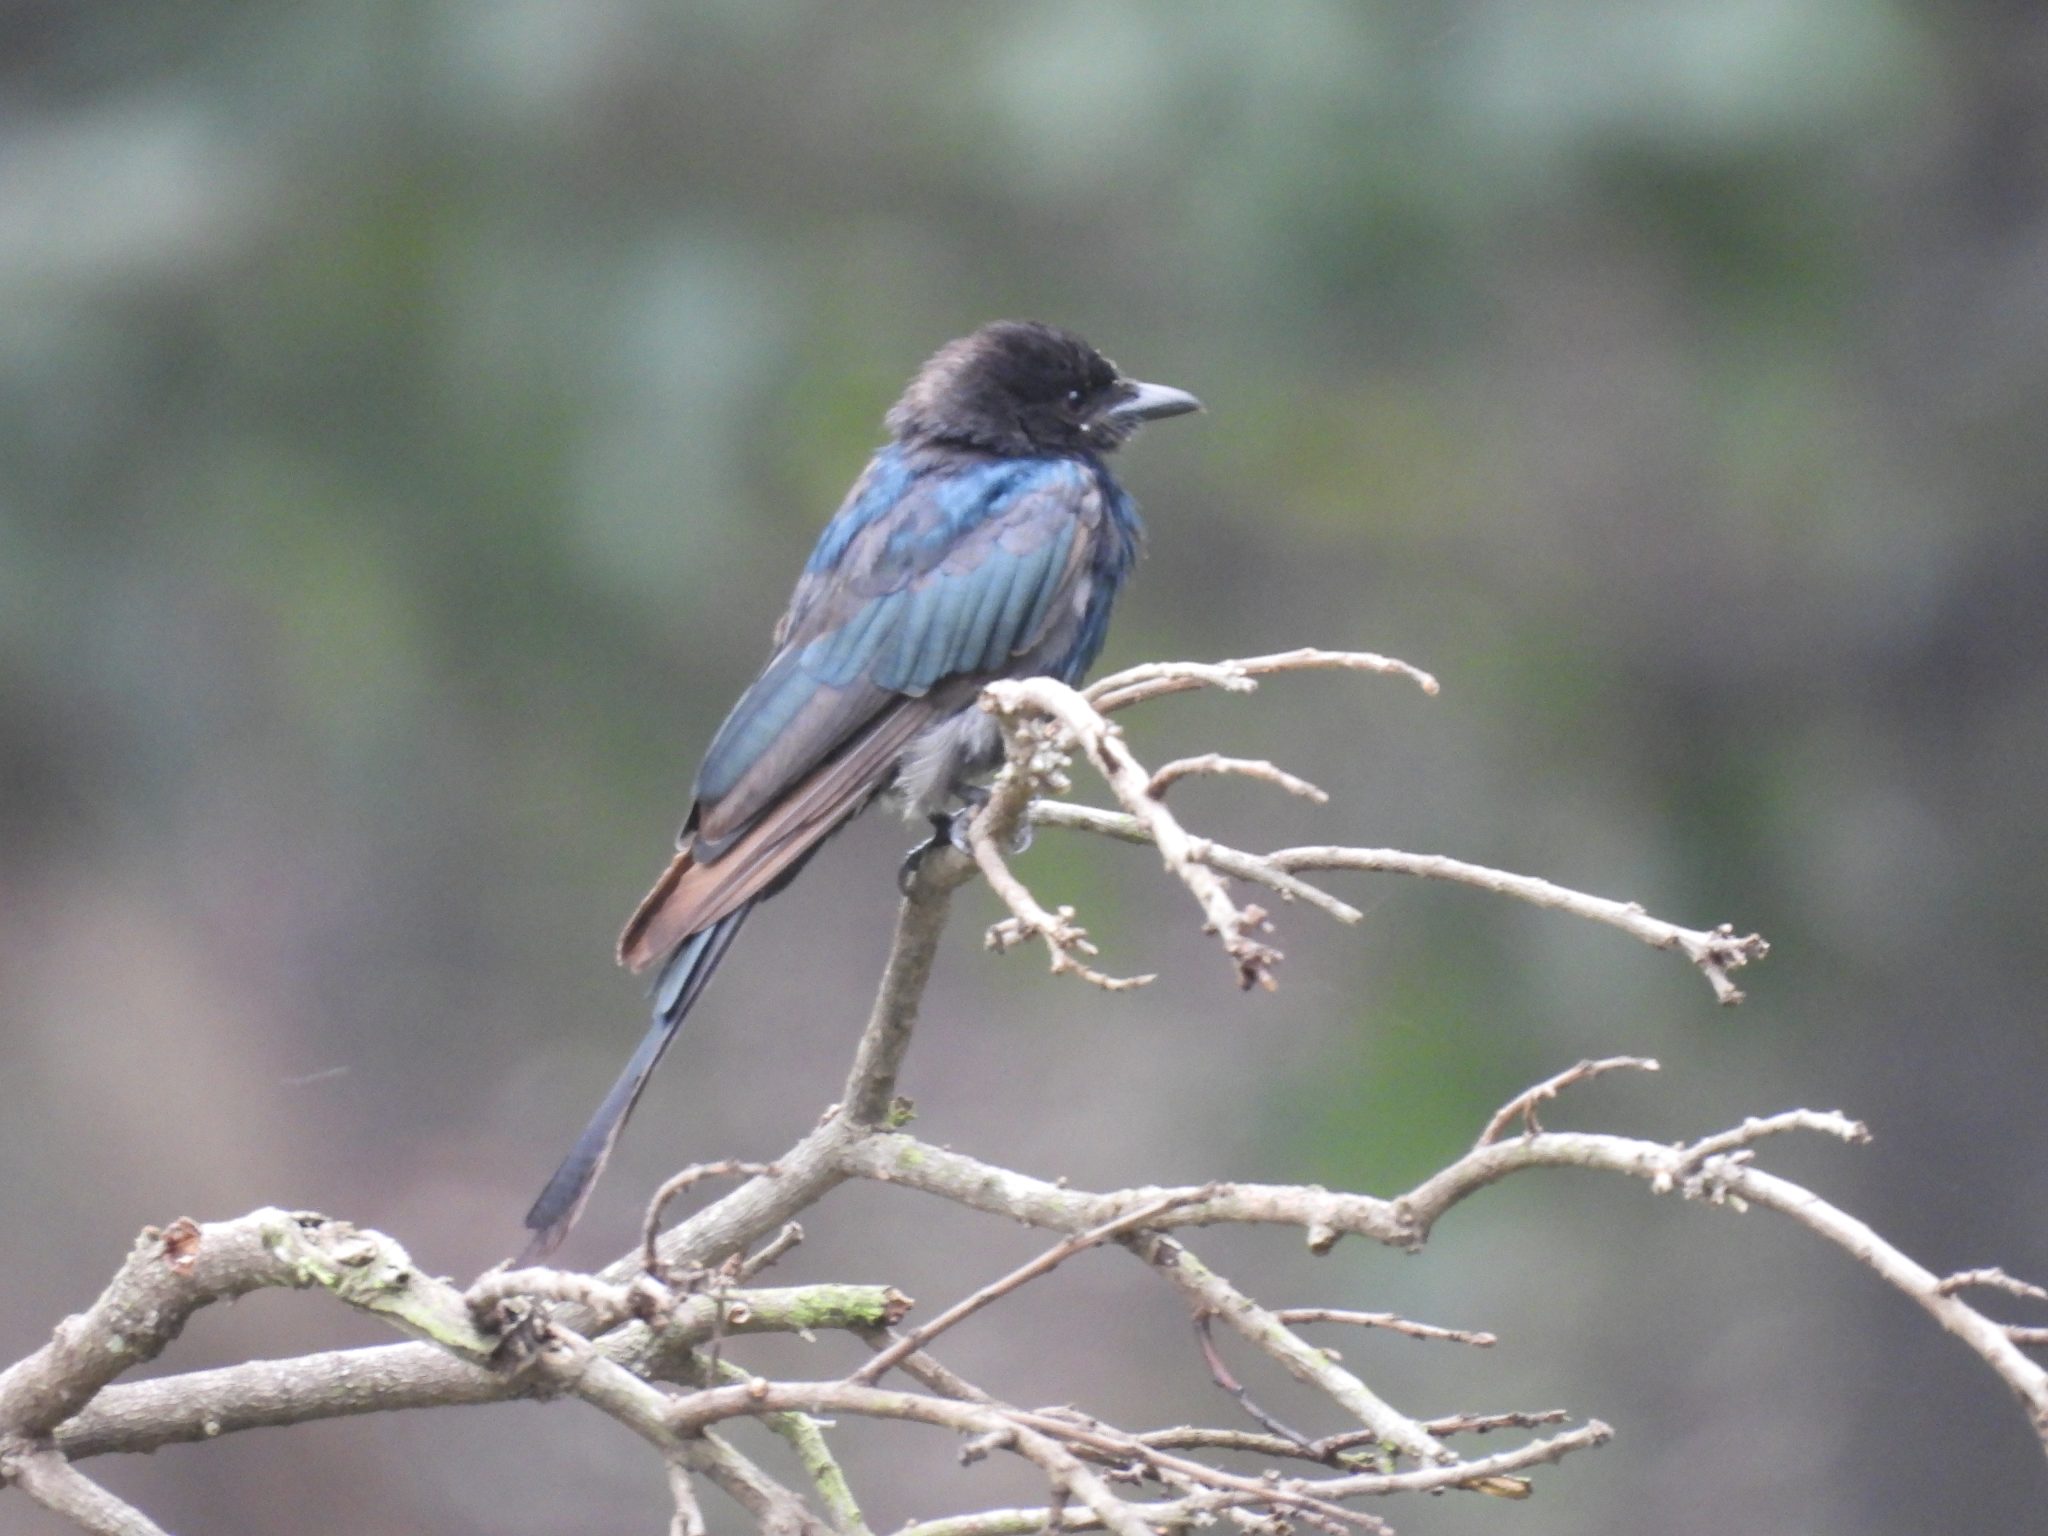 Black Drongo perched on a branch.